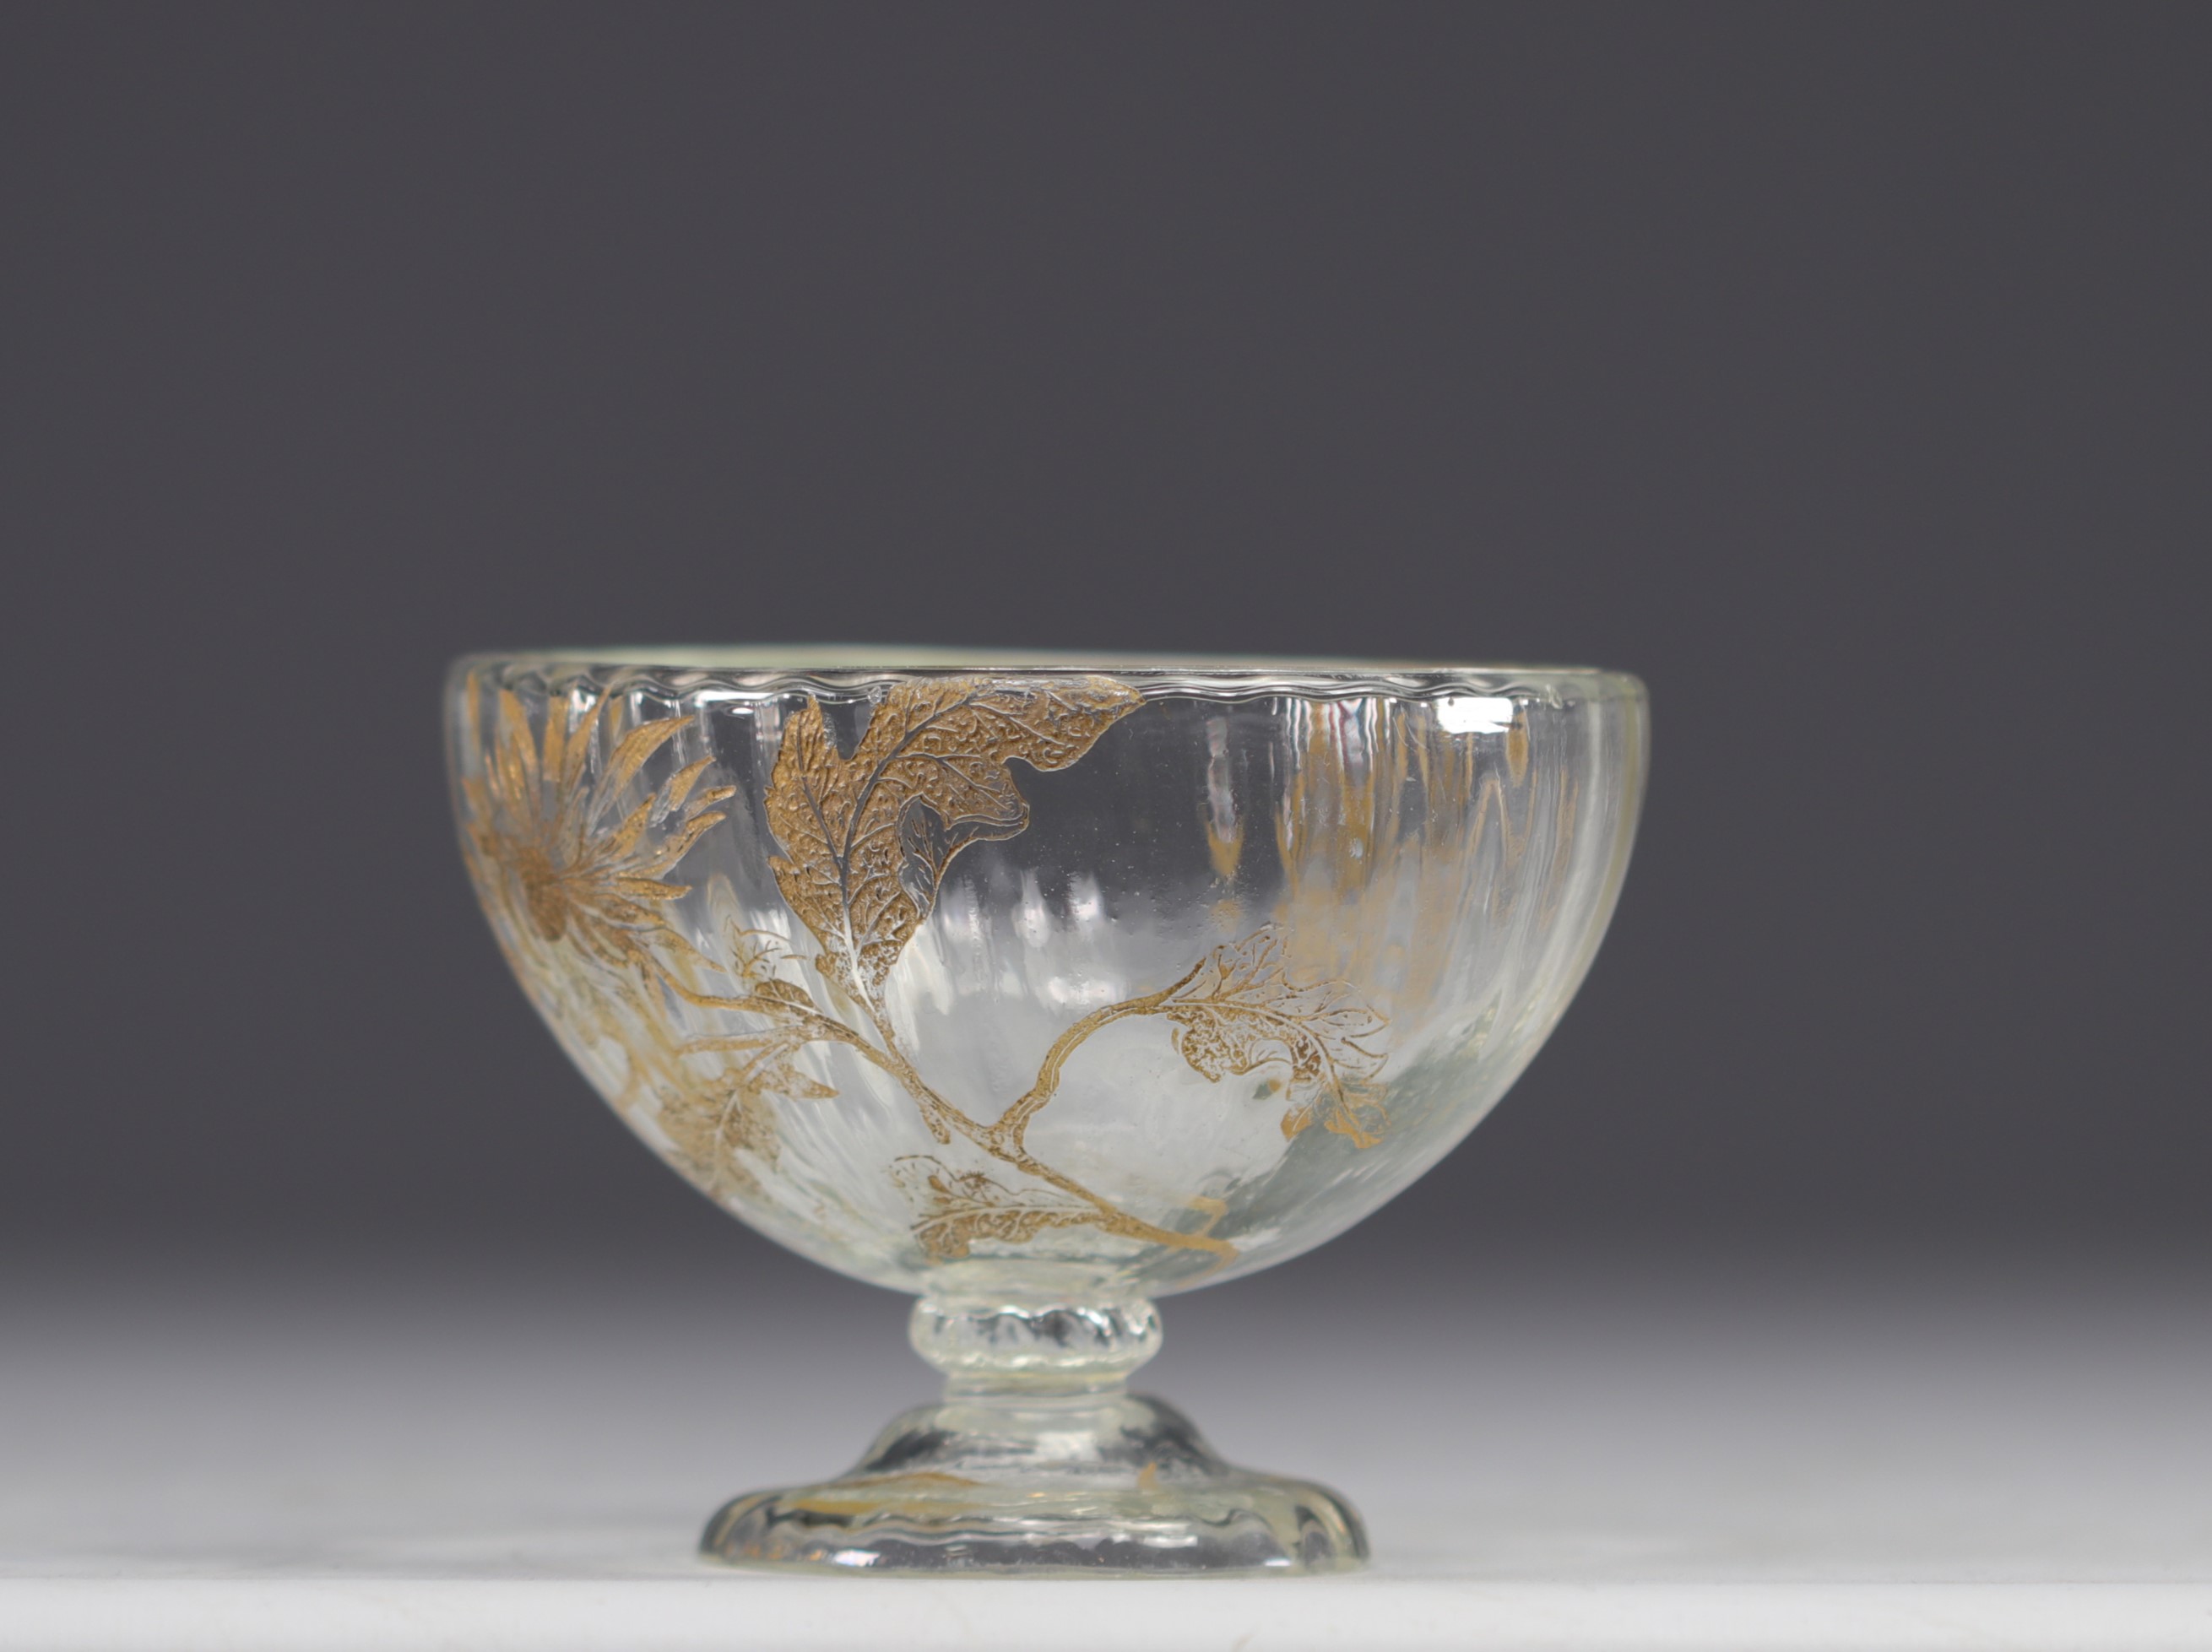 Cristallerie Emile GALLE, standing bowl decorated with gold flowers. - Image 2 of 5